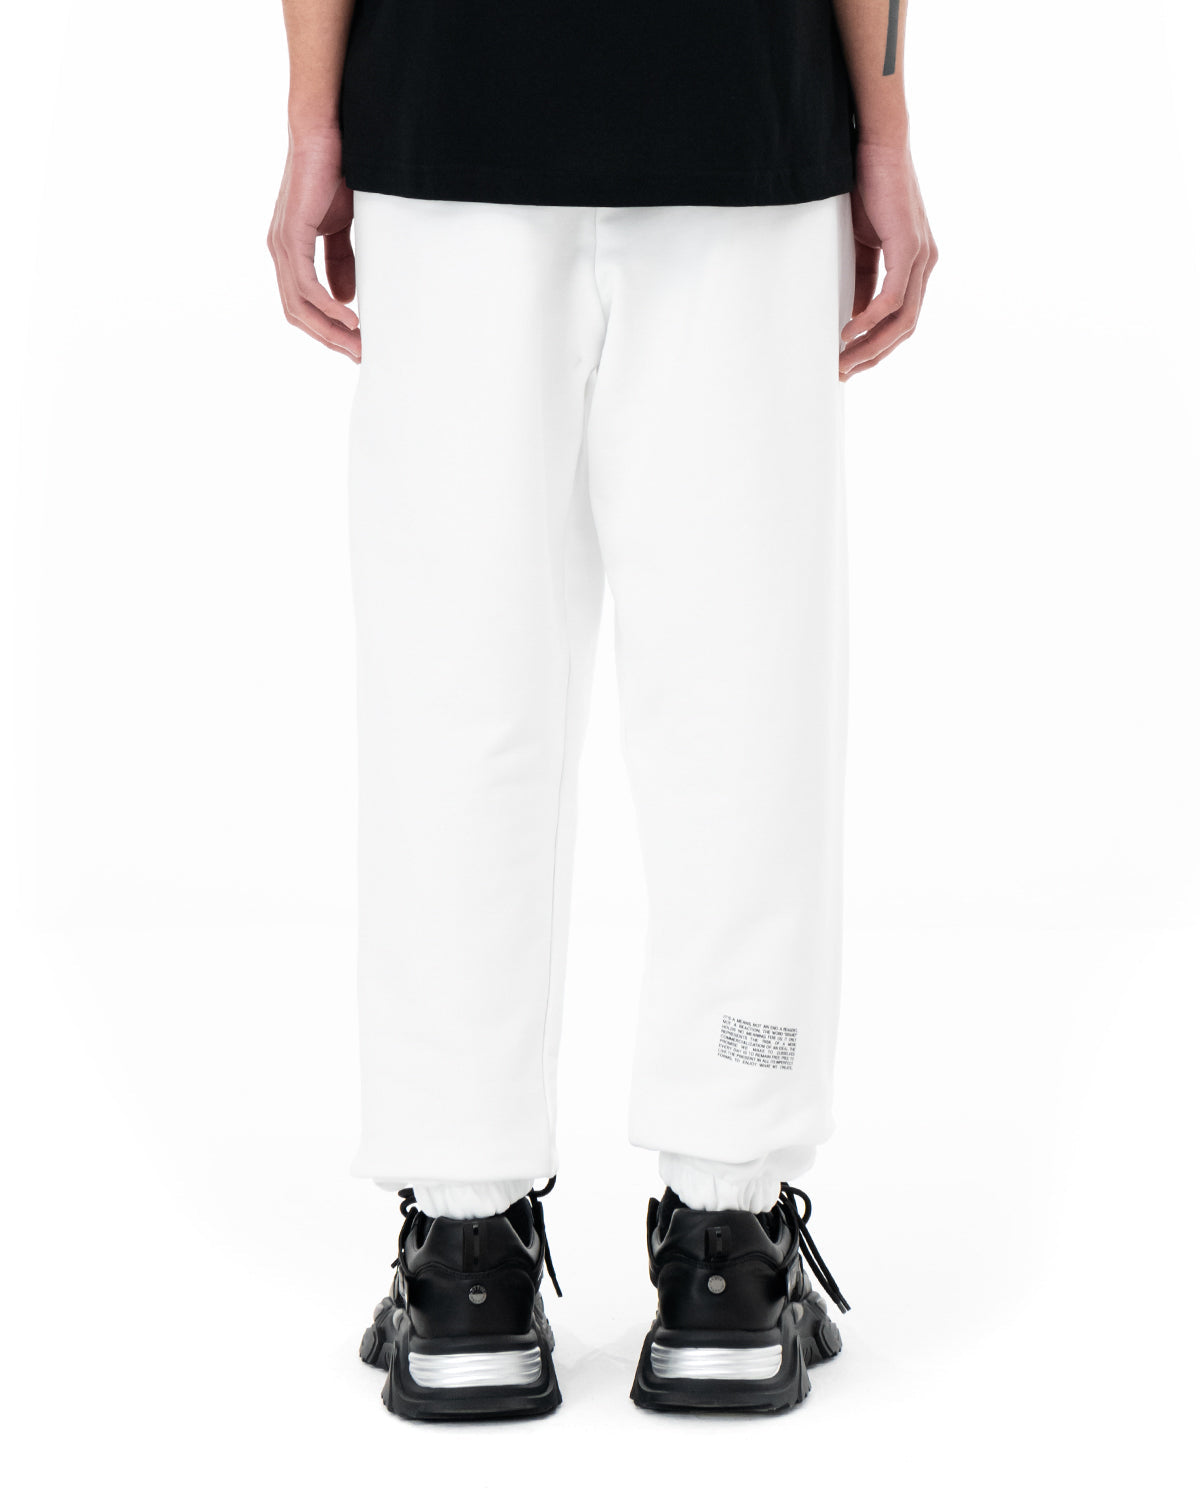 Classic White Joggers | Blowhammer